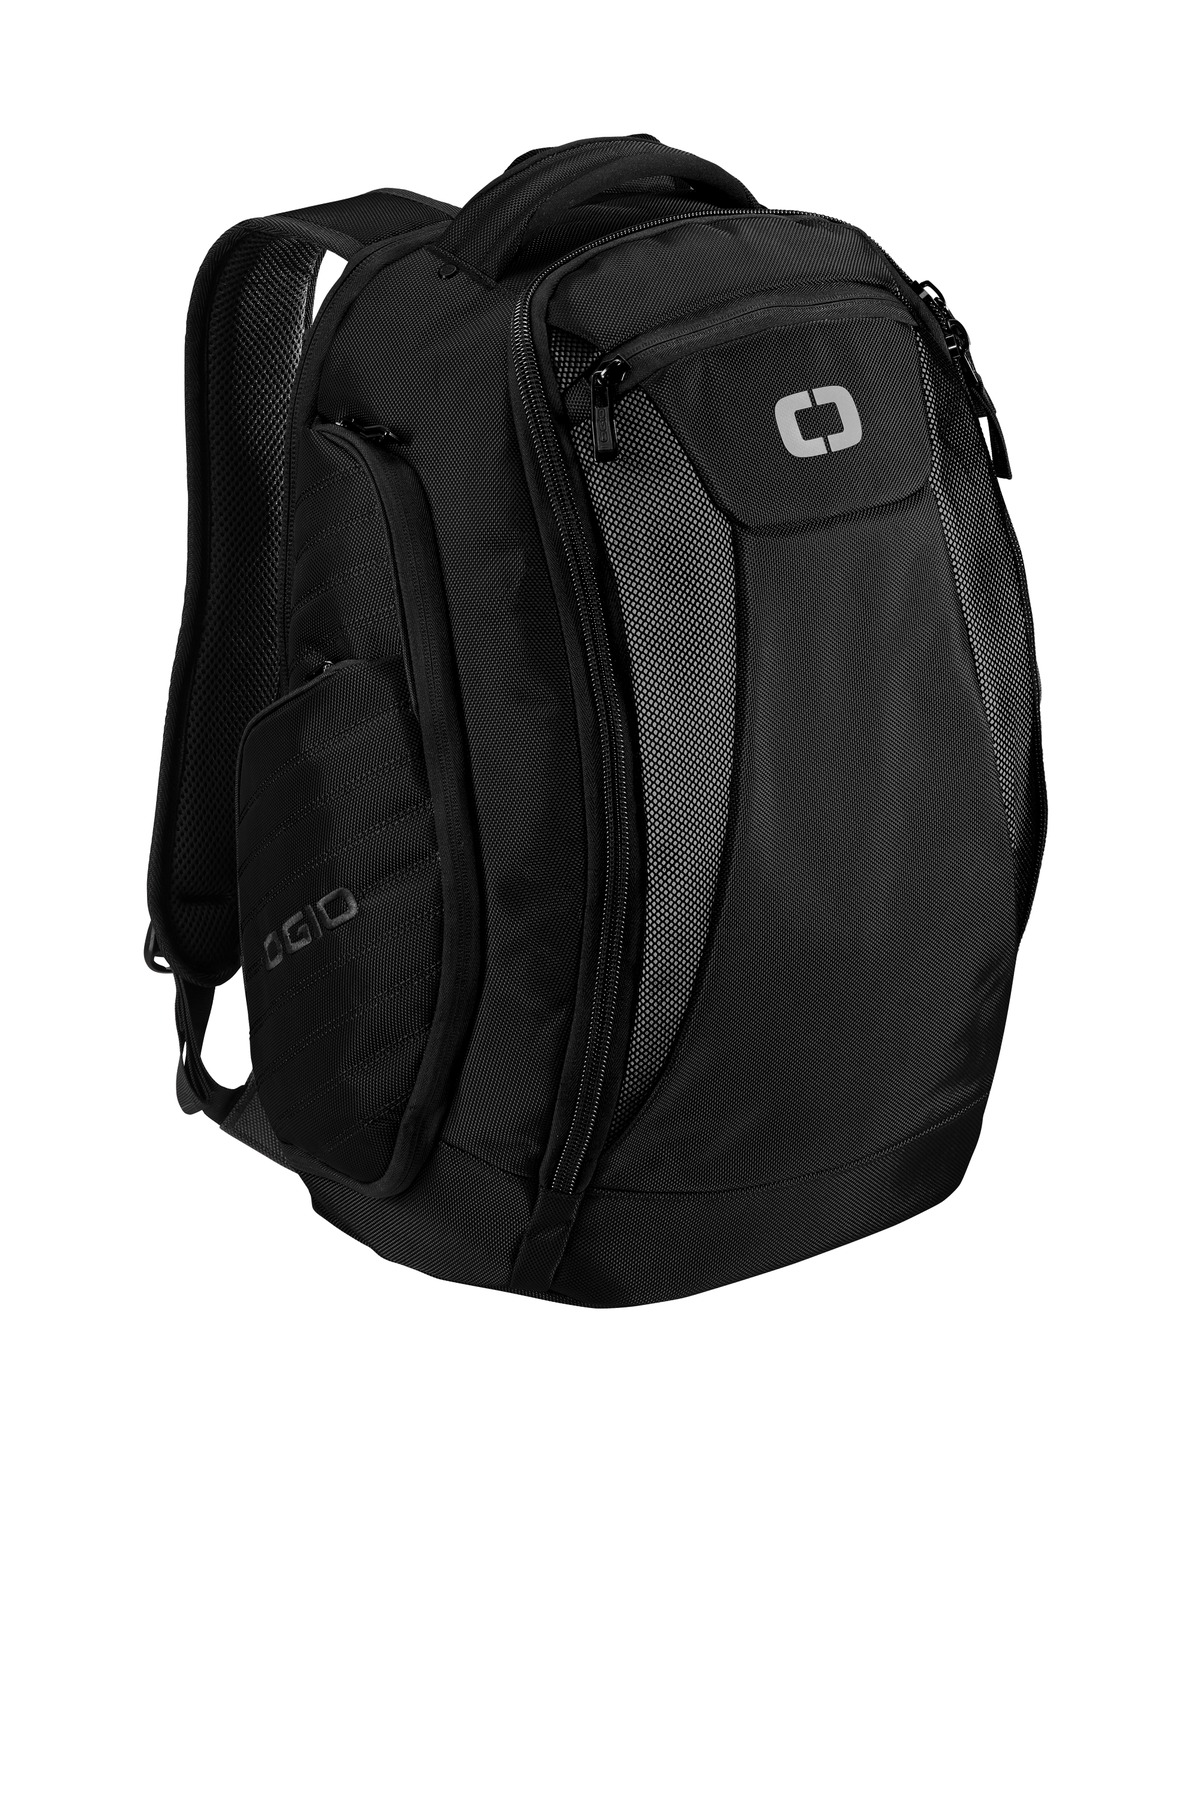 OGIO Flashpoint Pack-